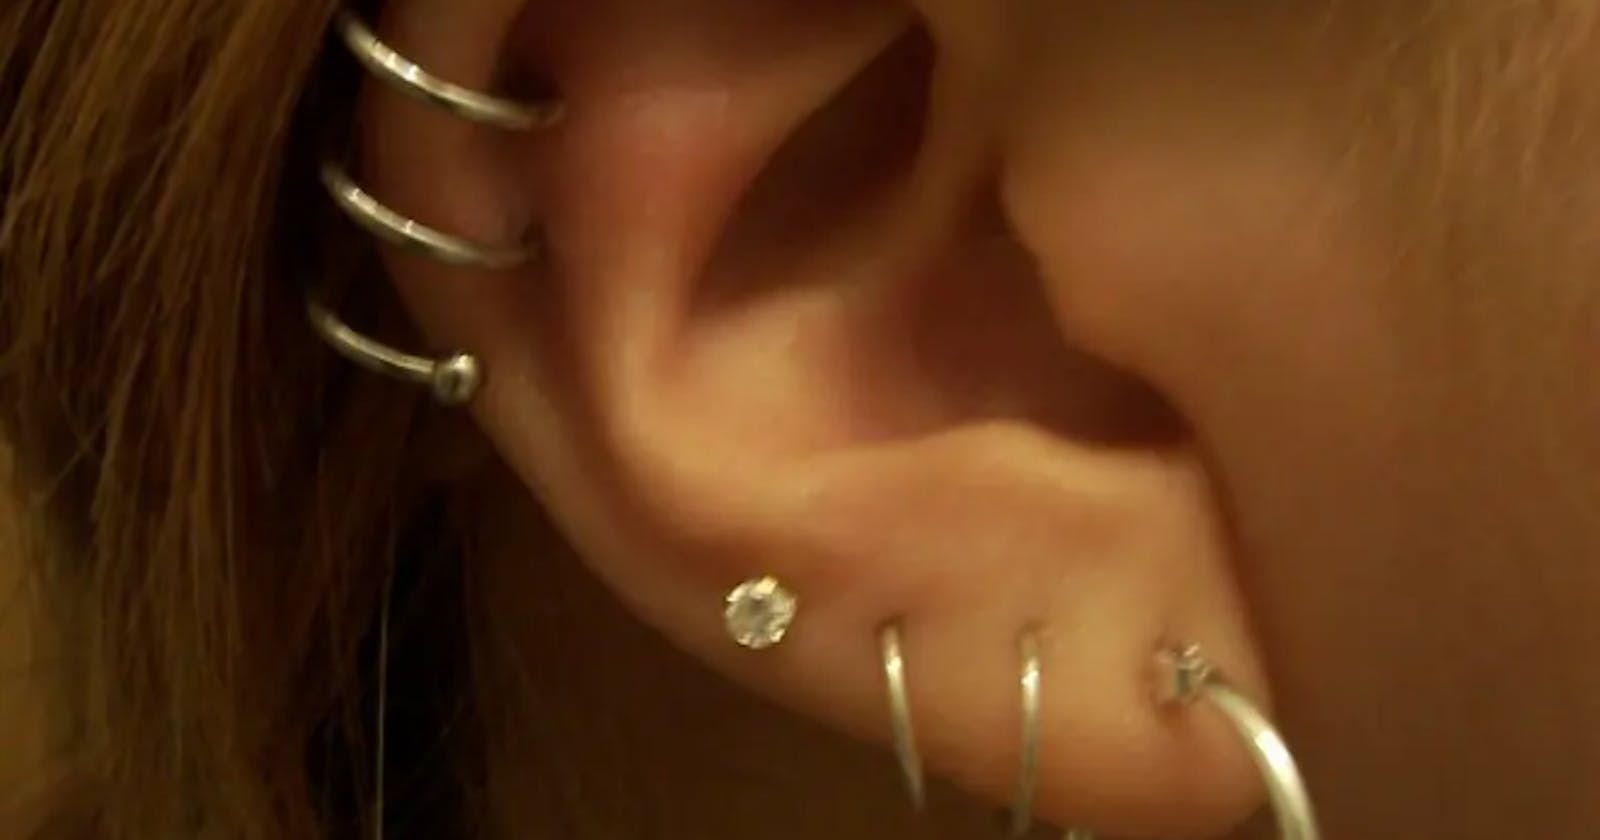 The Helix Piercing: Learn More